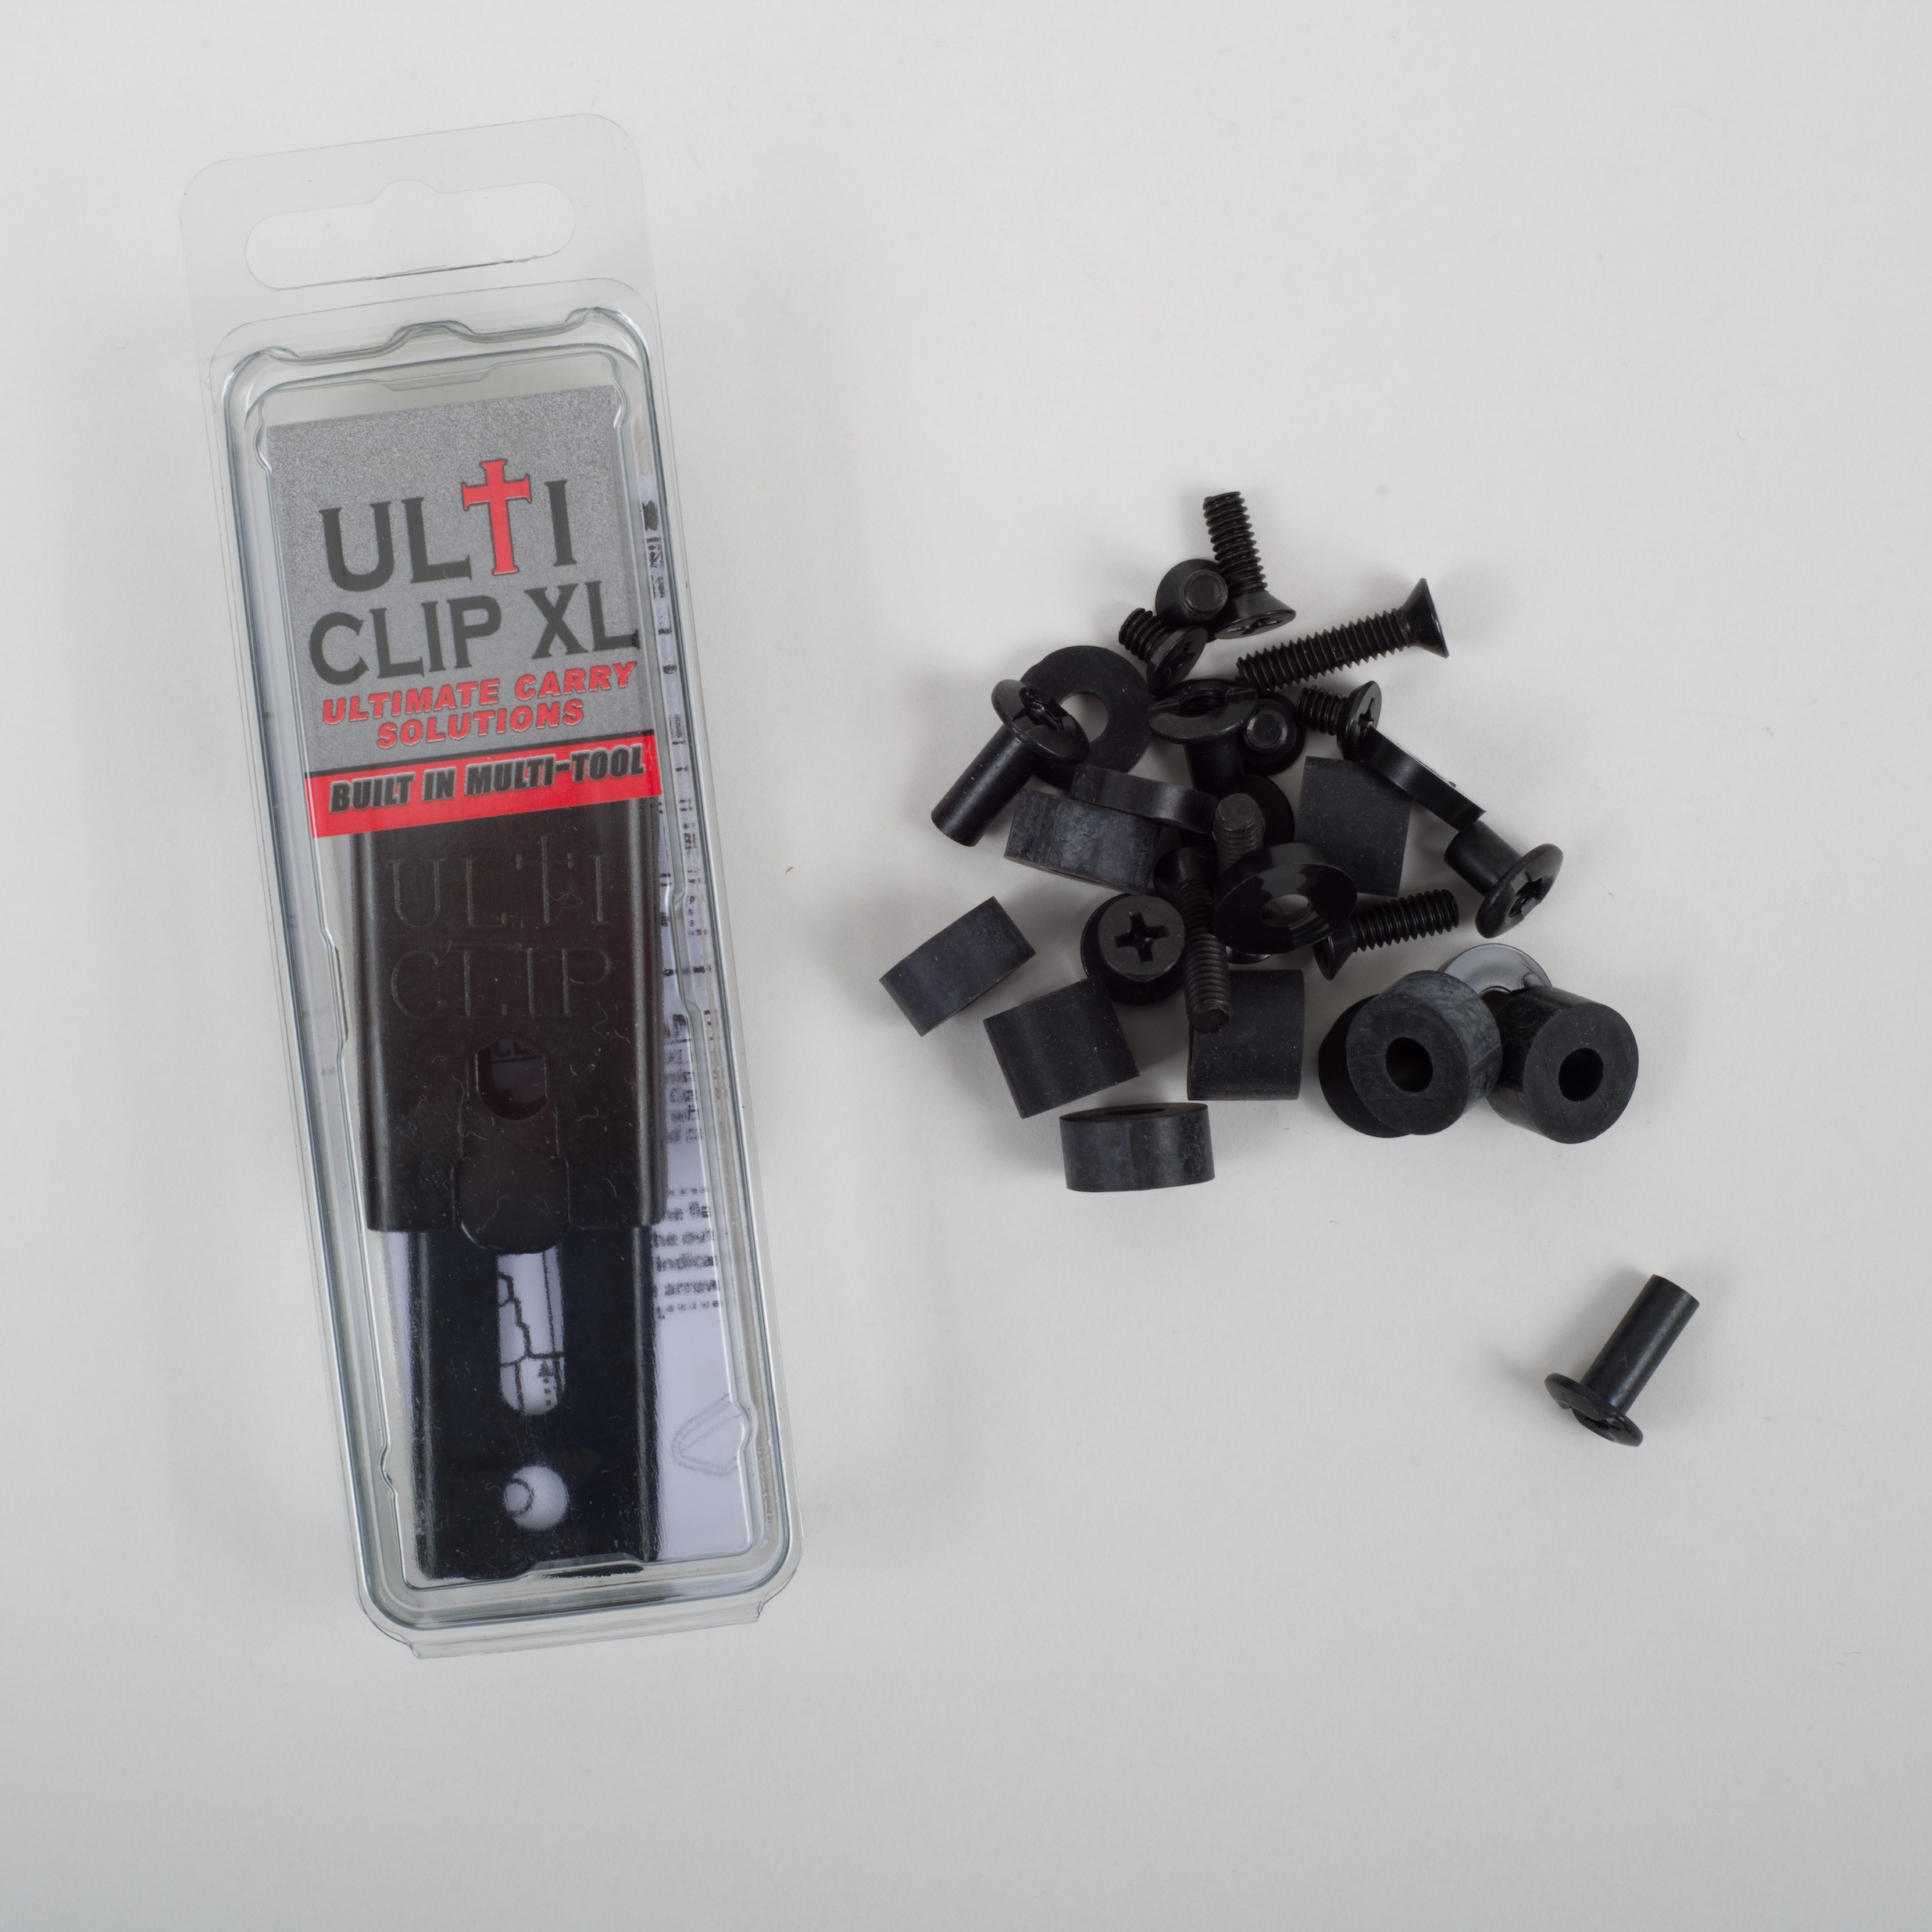 IWB UltiClip XL Kit - Eclipse Holsters